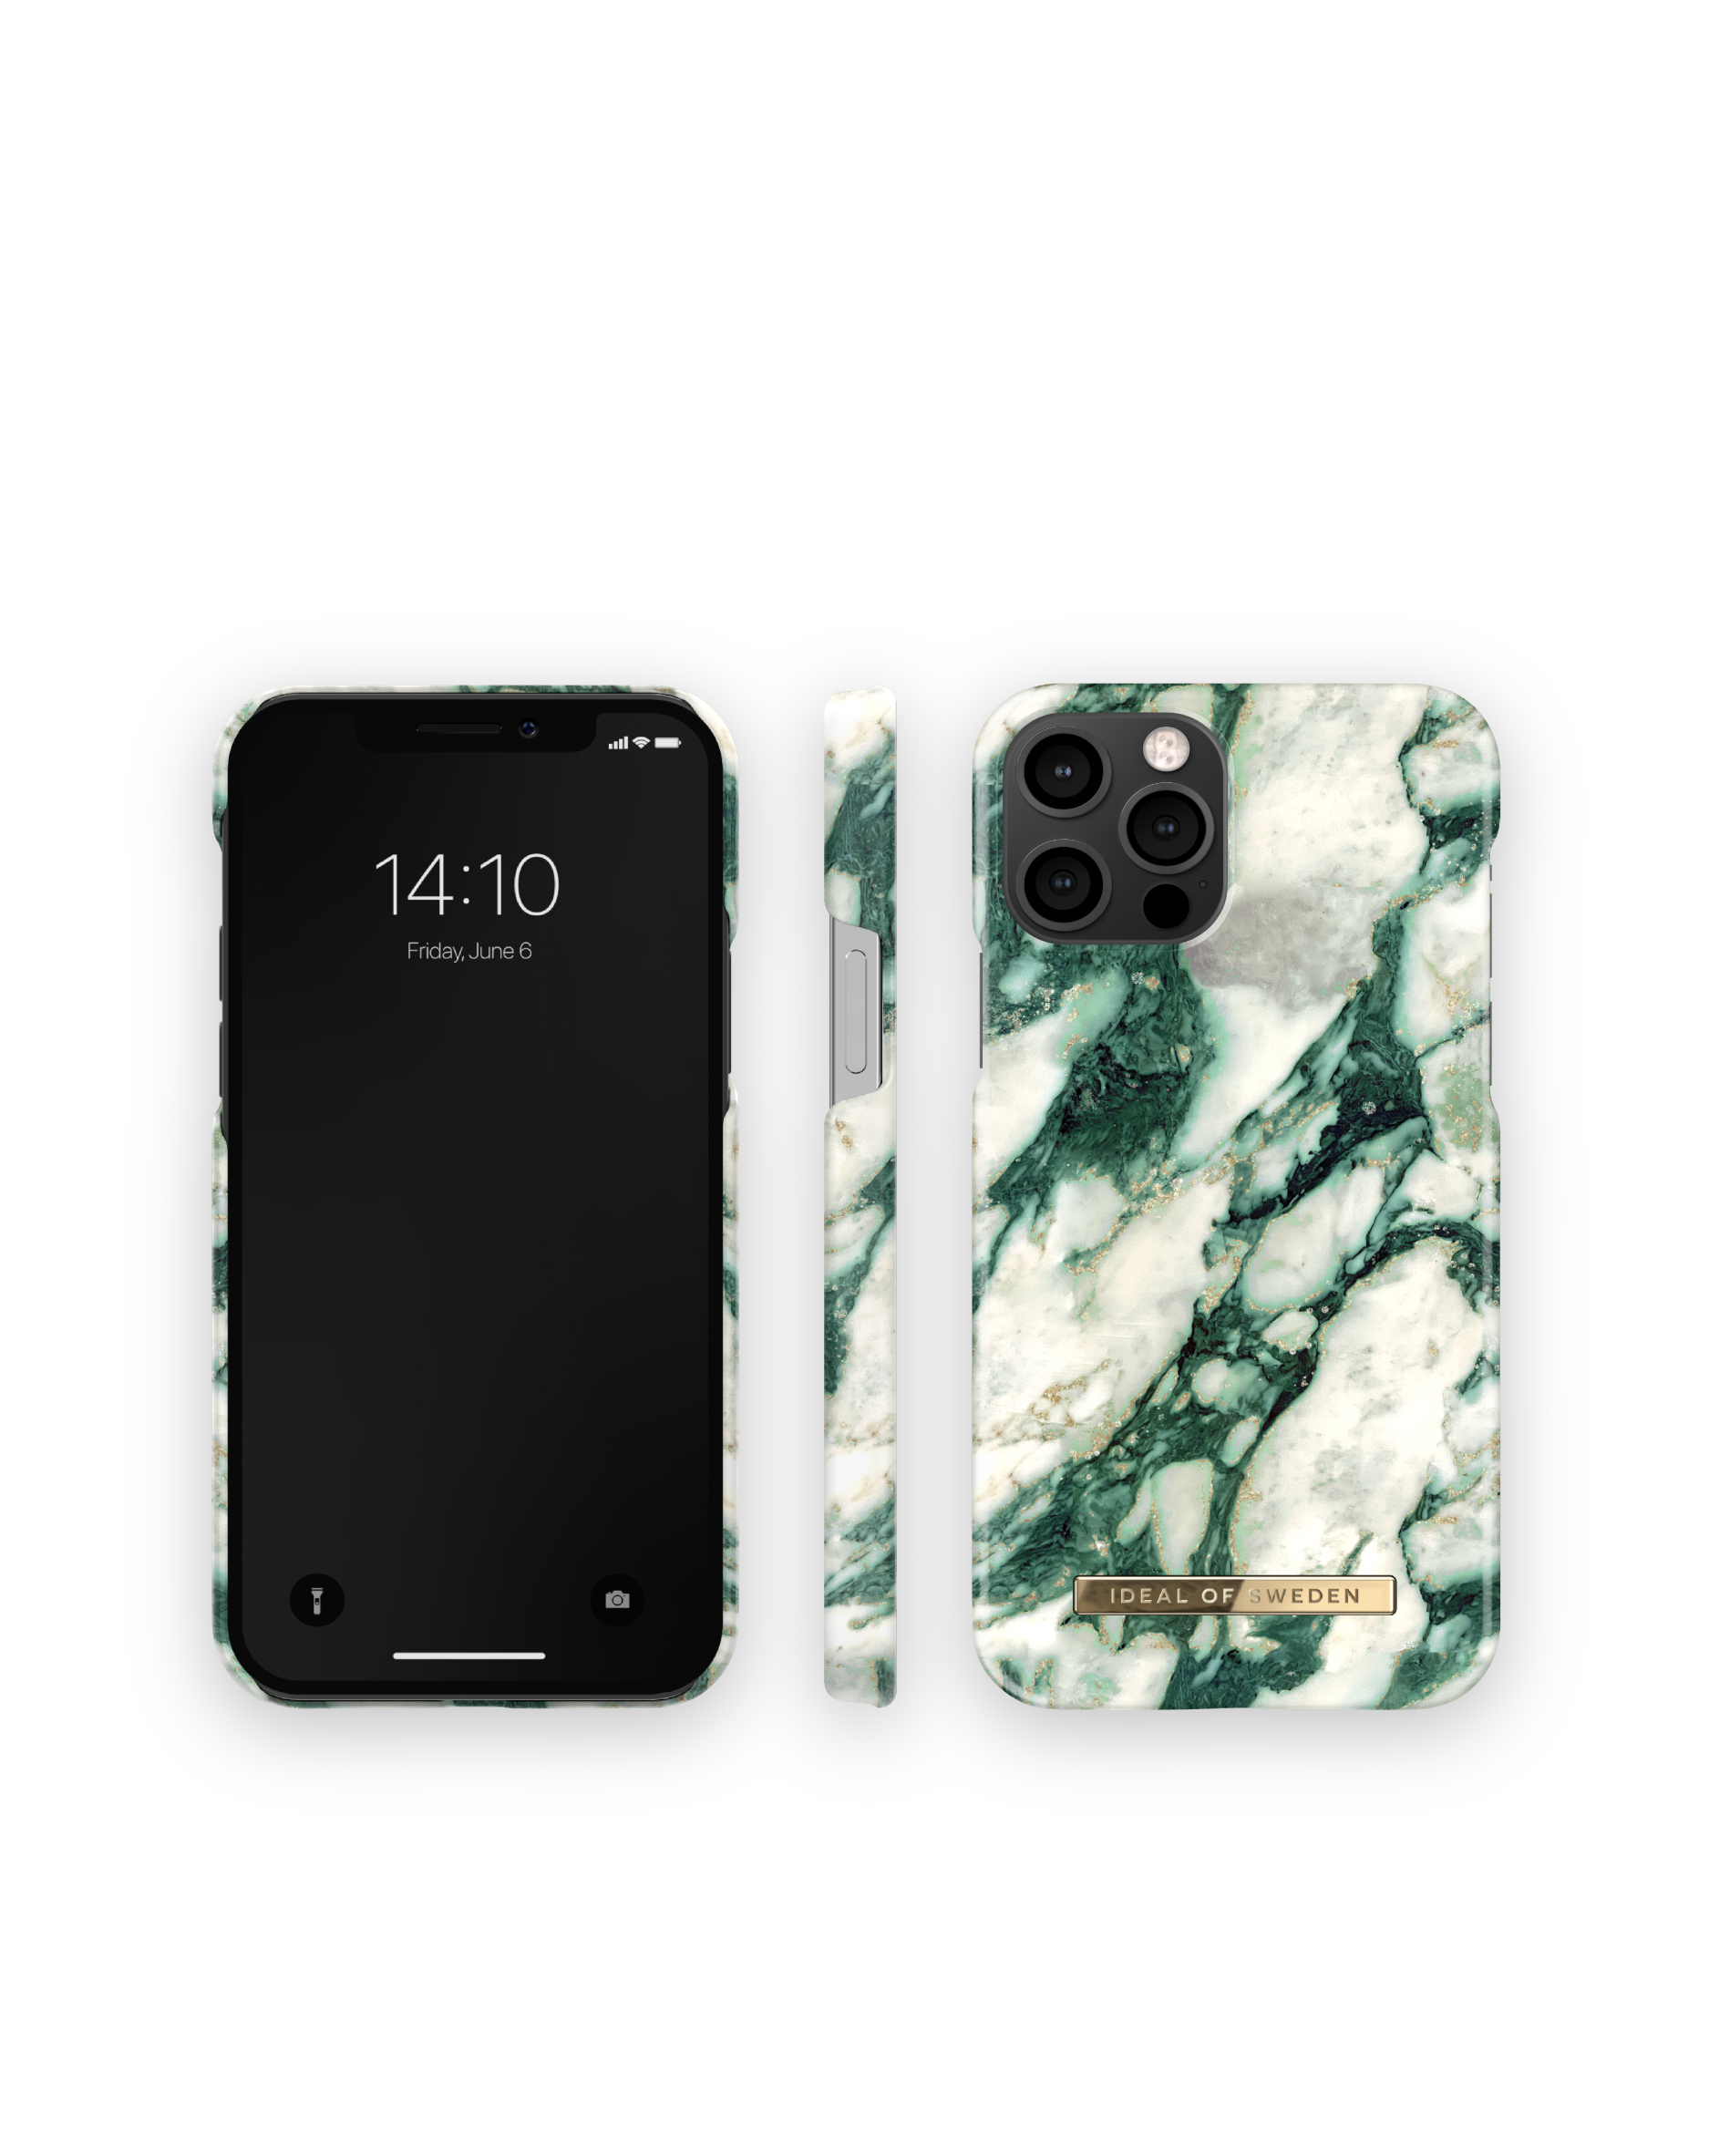 IDFCMR21-I2061-379, Apple, Emerald Backcover, 12/12 Marble OF Calacatta iPhone Pro, IDEAL SWEDEN